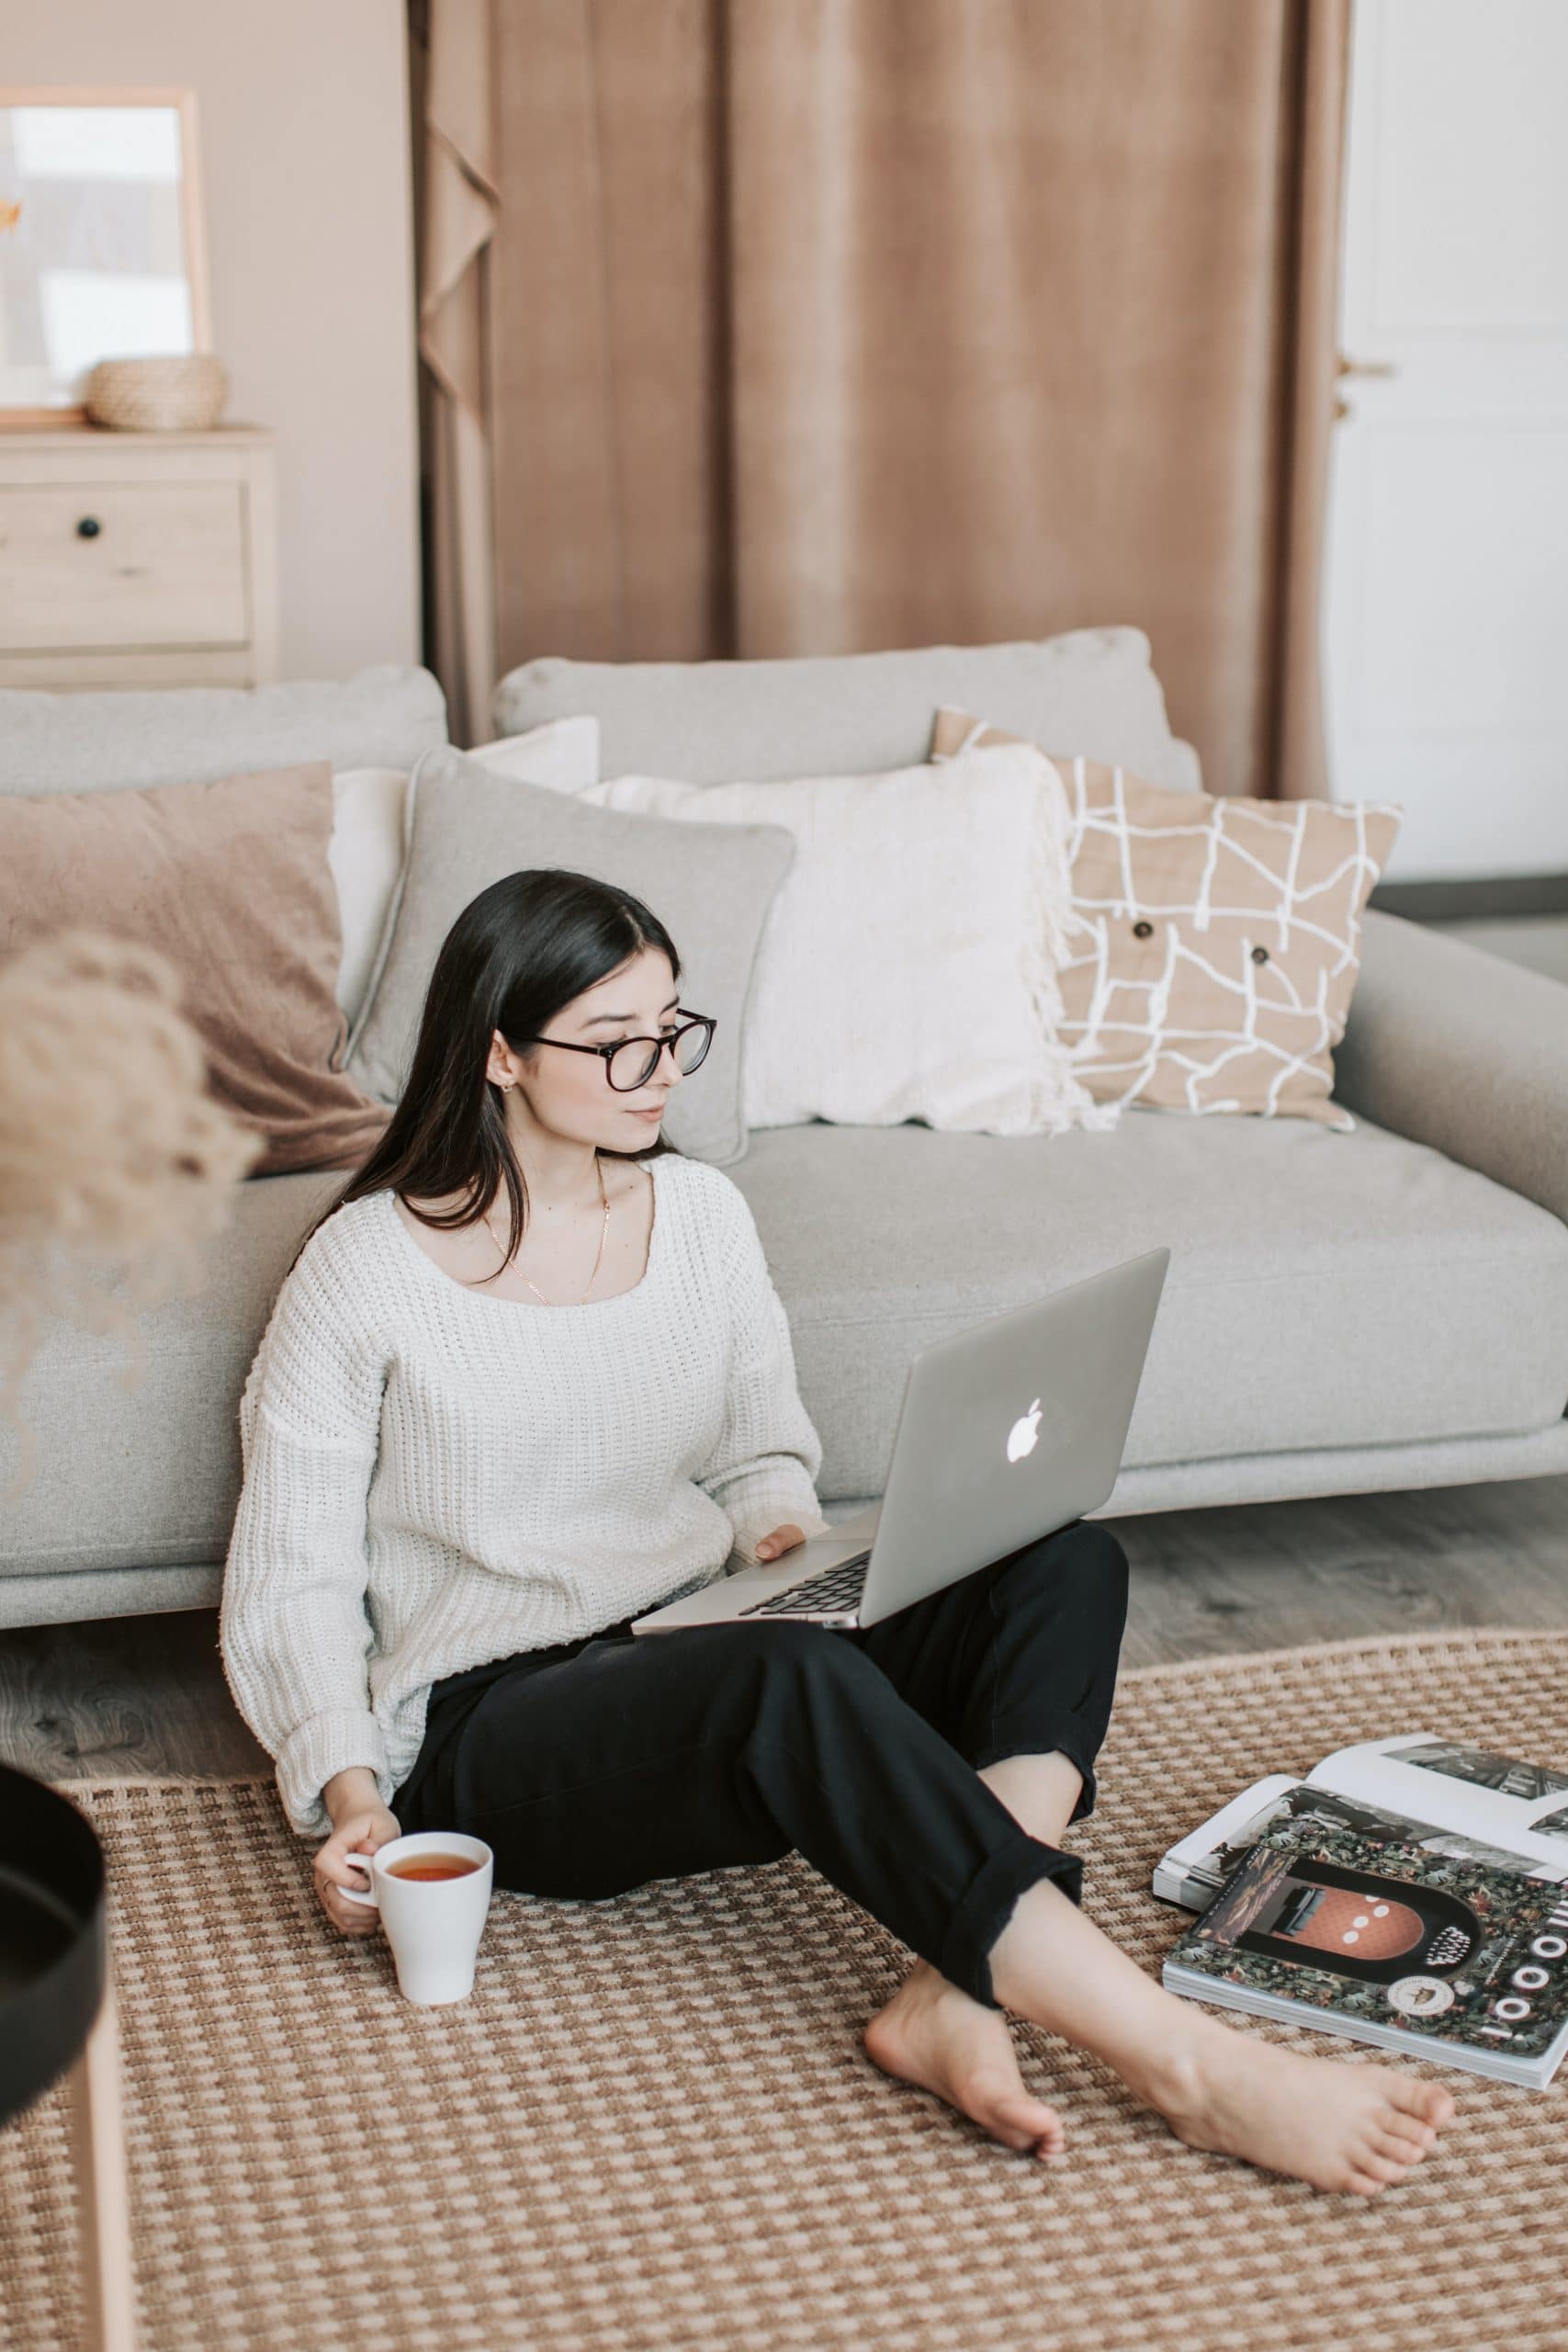 Young tech professional woman, sitting on the floor in front of her sofa. She is attending an online therapy session from home on her laptop. She has a serious look on her face and is holding a cup of tea.